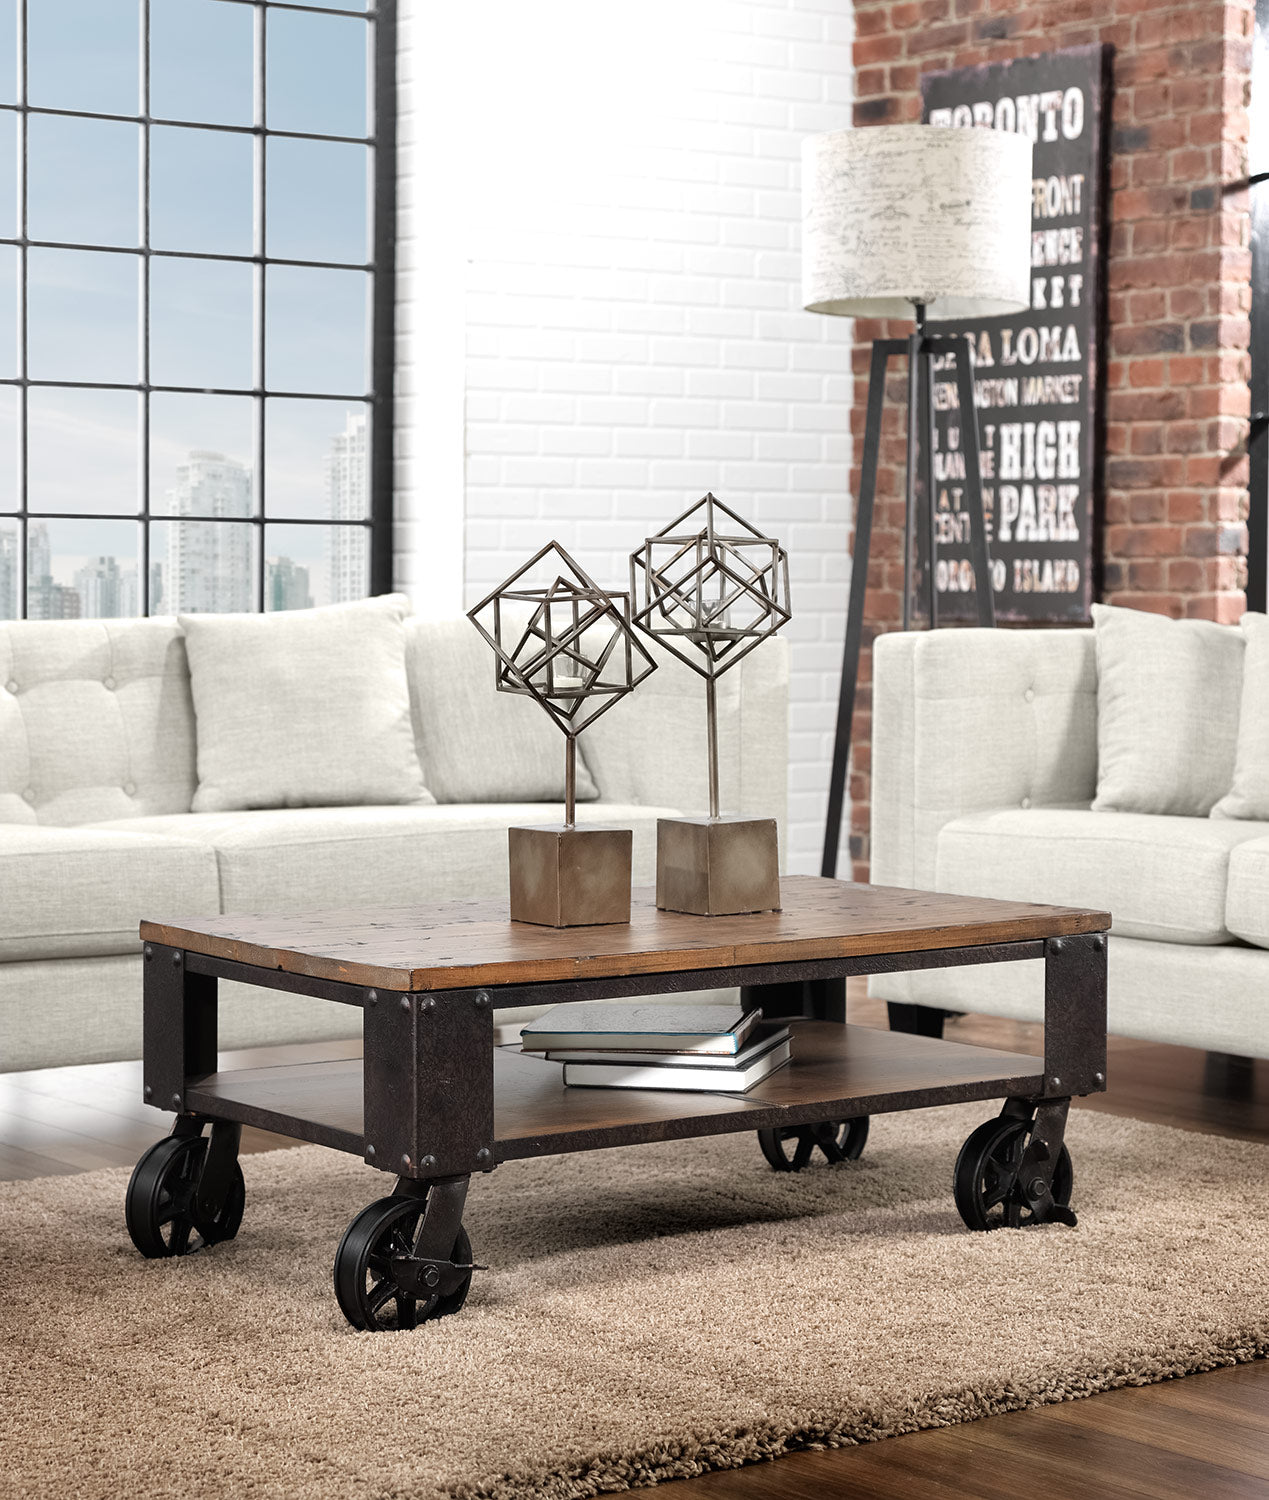 Pinebrook Condo Coffee Table - Distressed Natural Pine